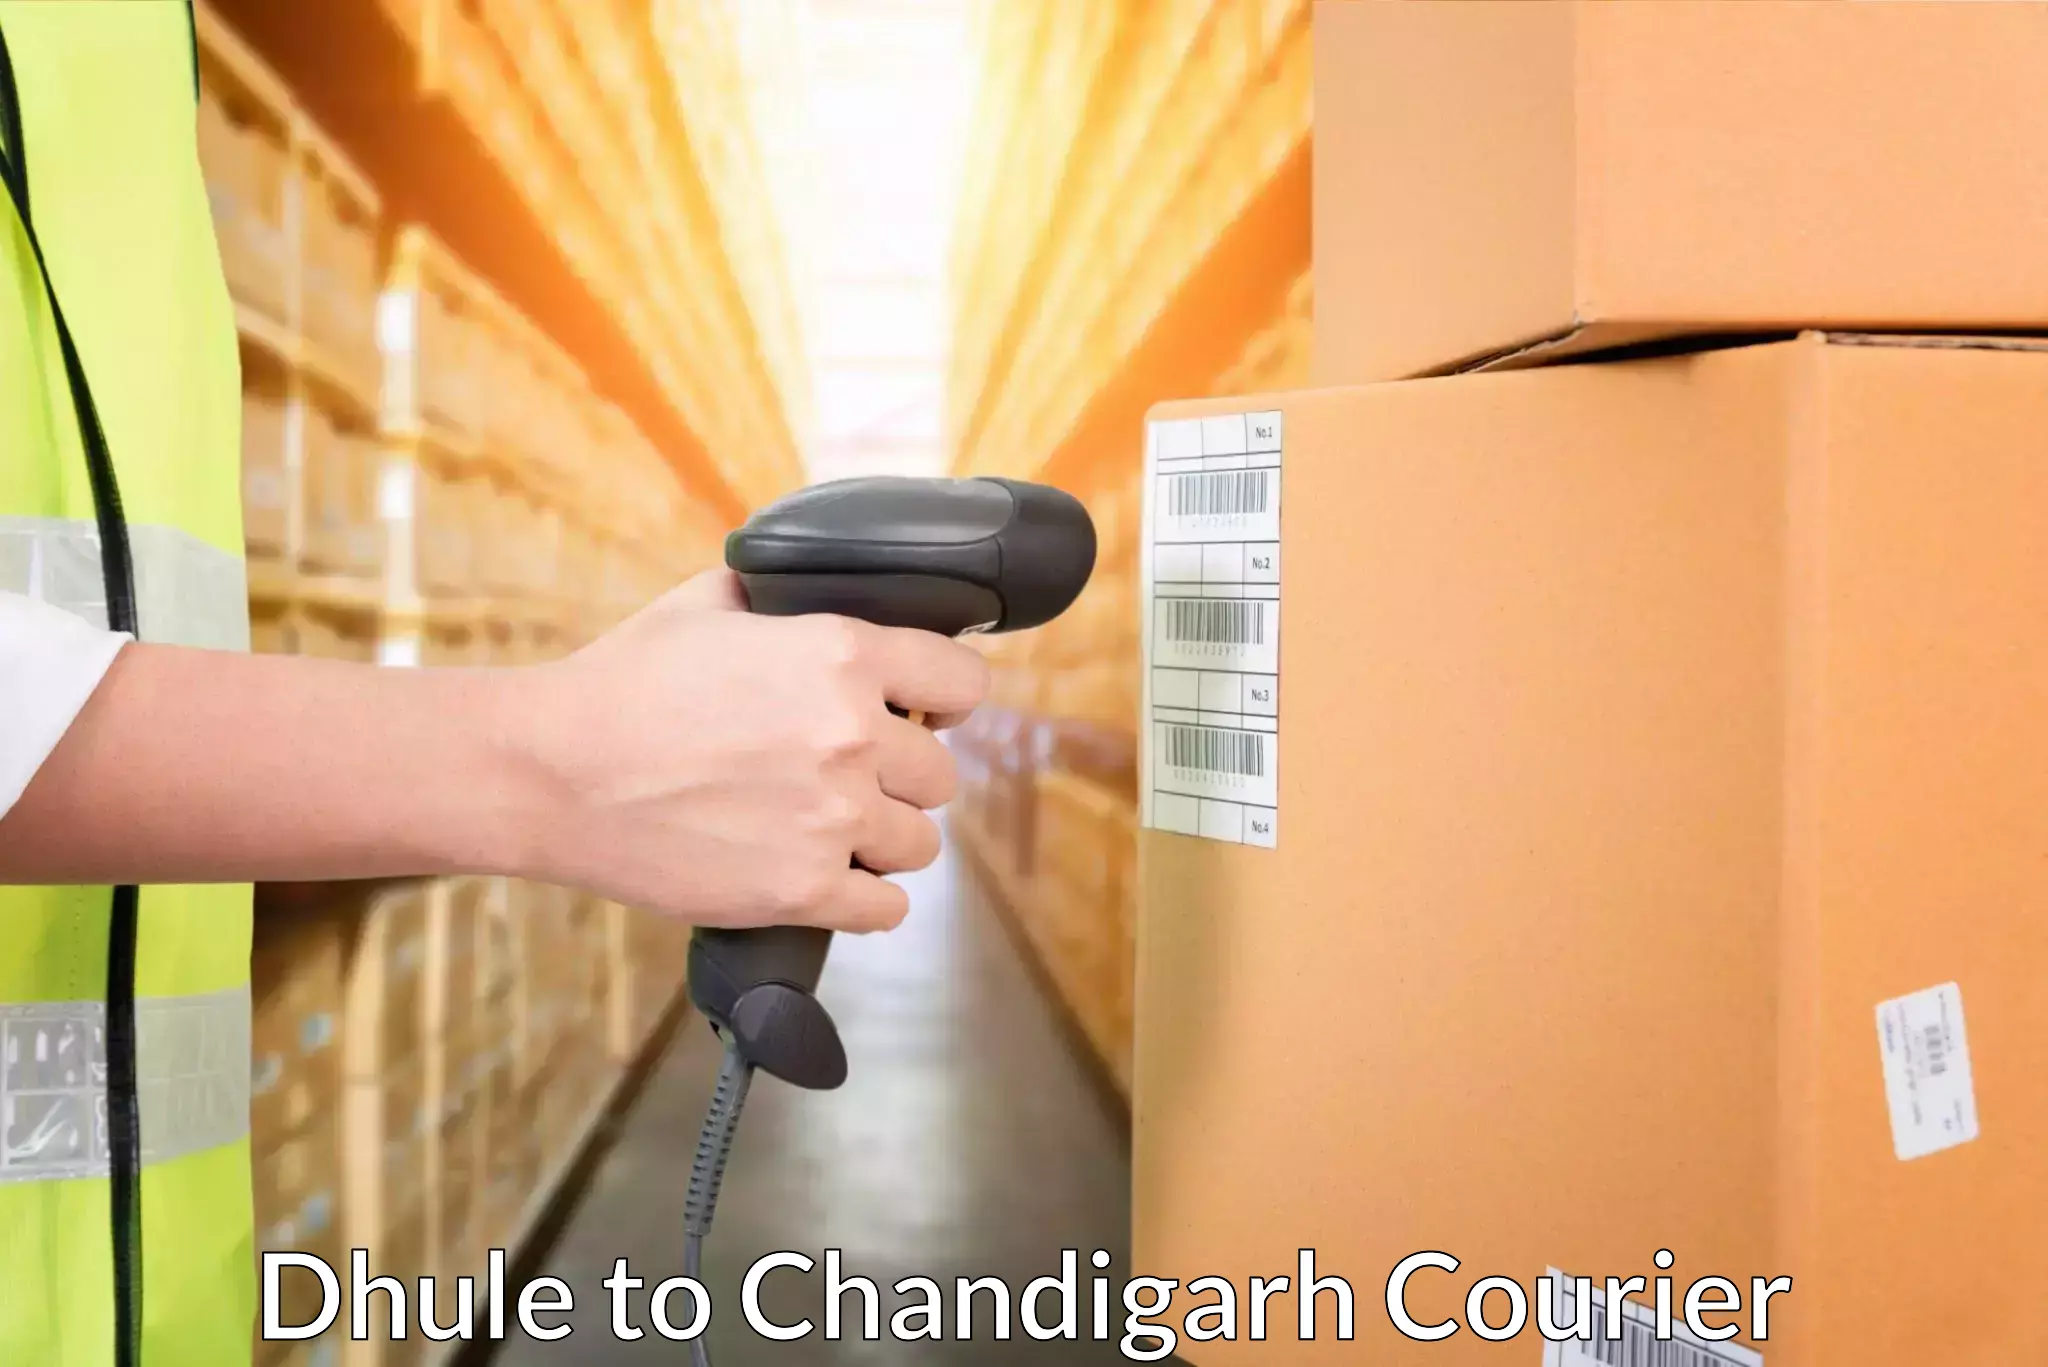 Efficient order fulfillment Dhule to Chandigarh